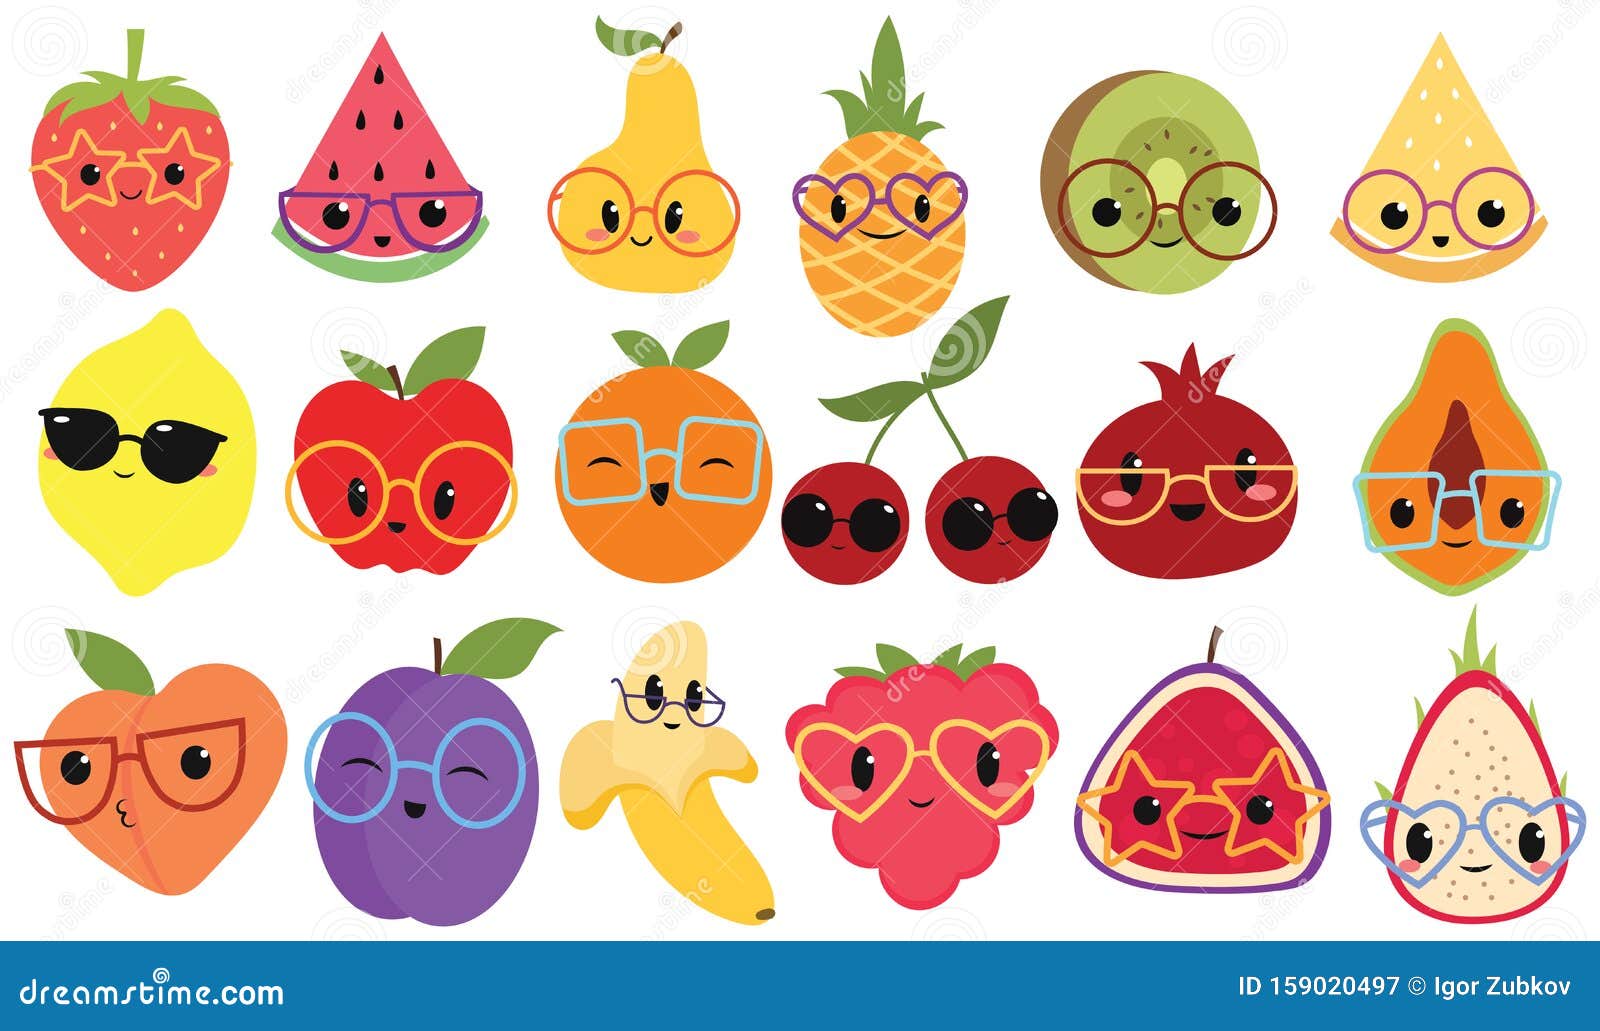 Set of Cartoon Fruits with Glasses. Collection of Cute Fruits with Faces.  Vector Illustration of Vegetable Food for Stock Vector - Illustration of  berry, character: 159020497